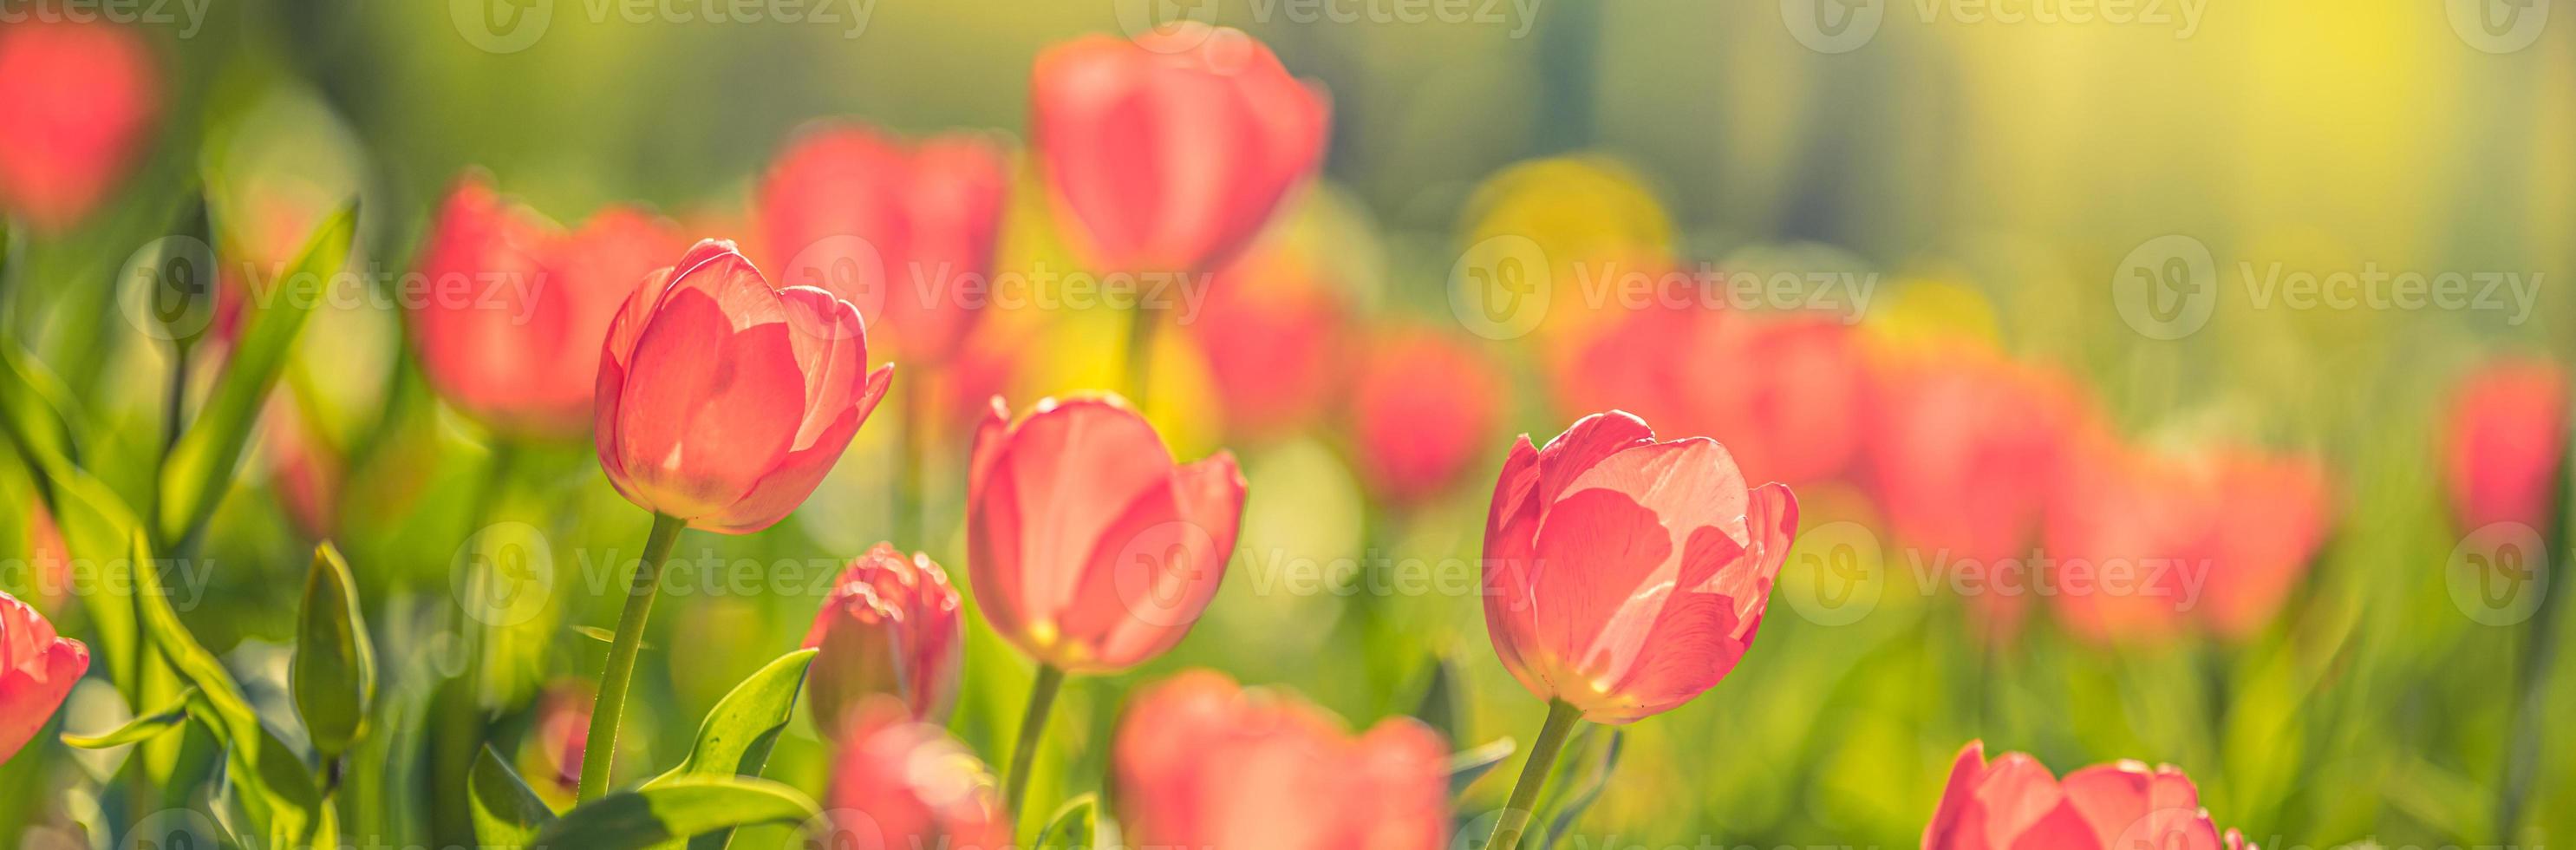 Closeup nature view of amazing red pink tulips blooming in garden. Spring flowers under sunlight. Natural sunny flower plants landscape and blurred romantic foliage. Serene panoramic nature banner photo